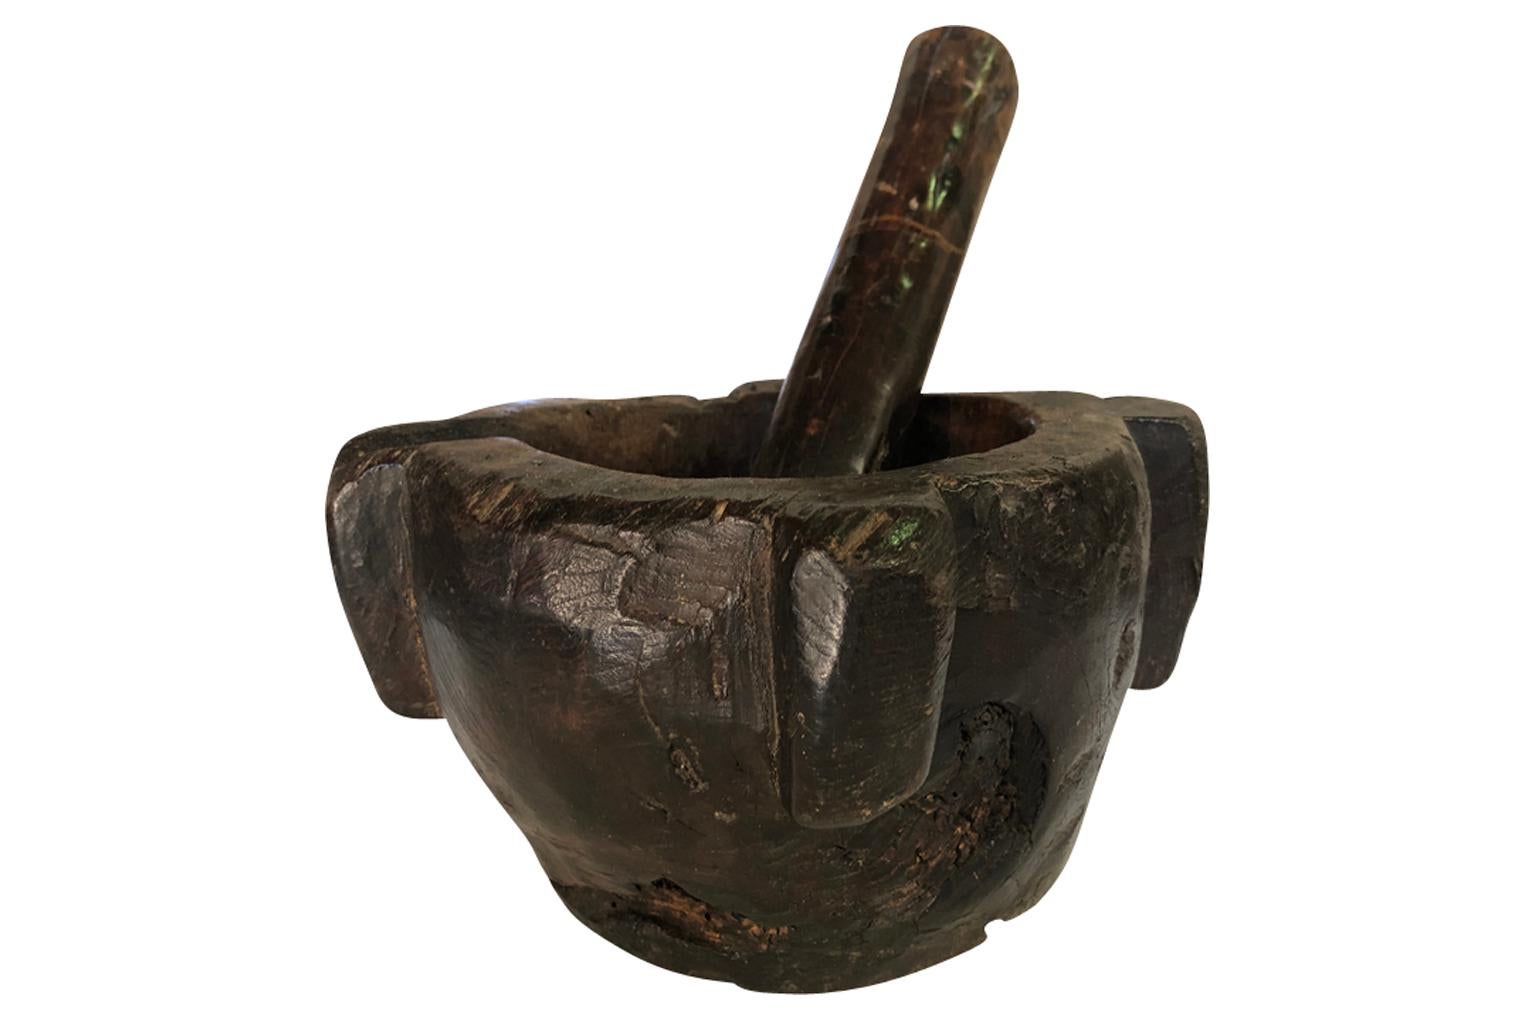 A very handsome 18th century mortar and pestle hand carved from a solid block of wood. Sensational patina. A wonderful object for table top, bookcase or kitchen counter.